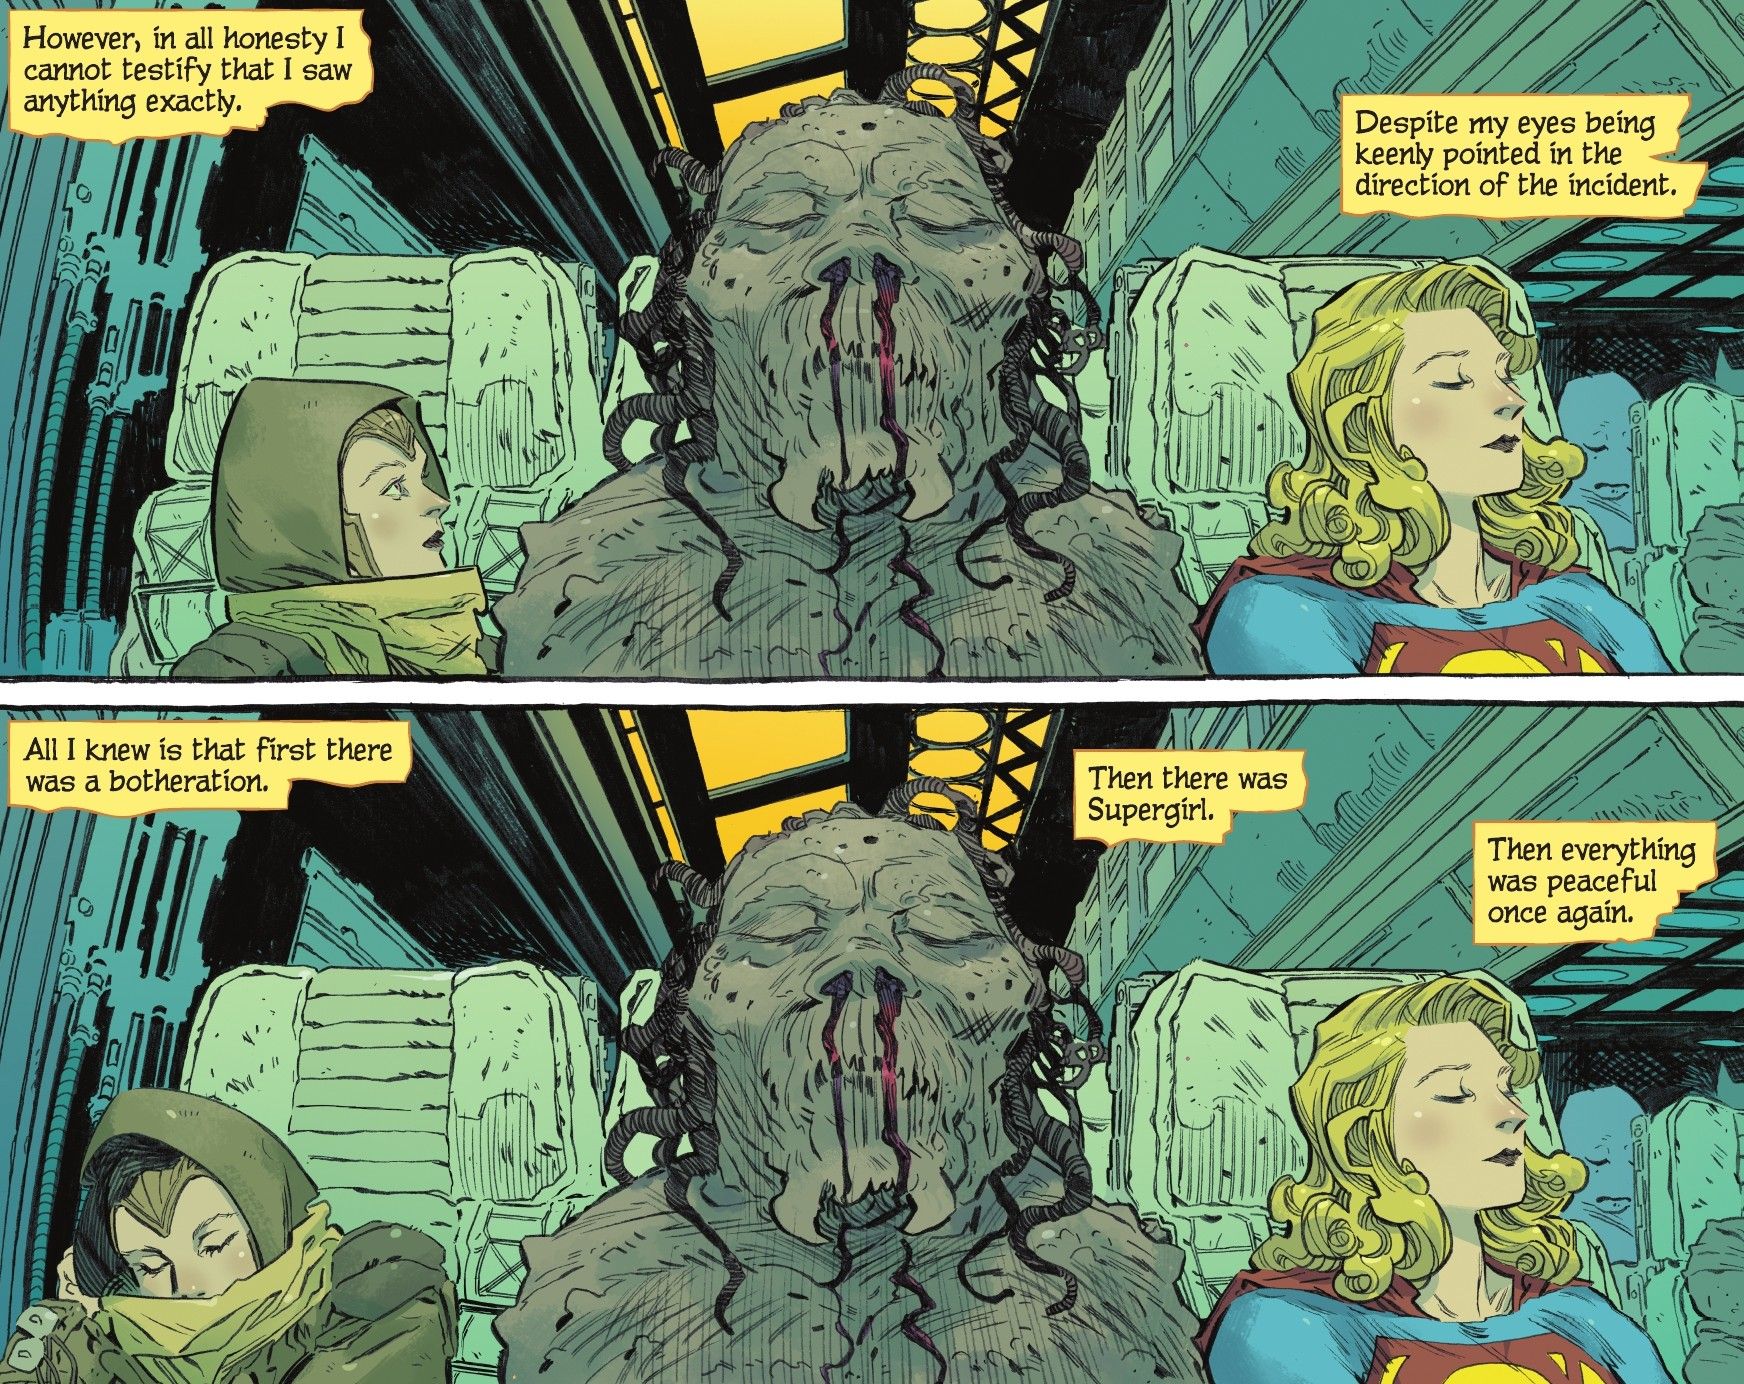 DC Explains Why the Comic Supergirl Is So Different From the CW